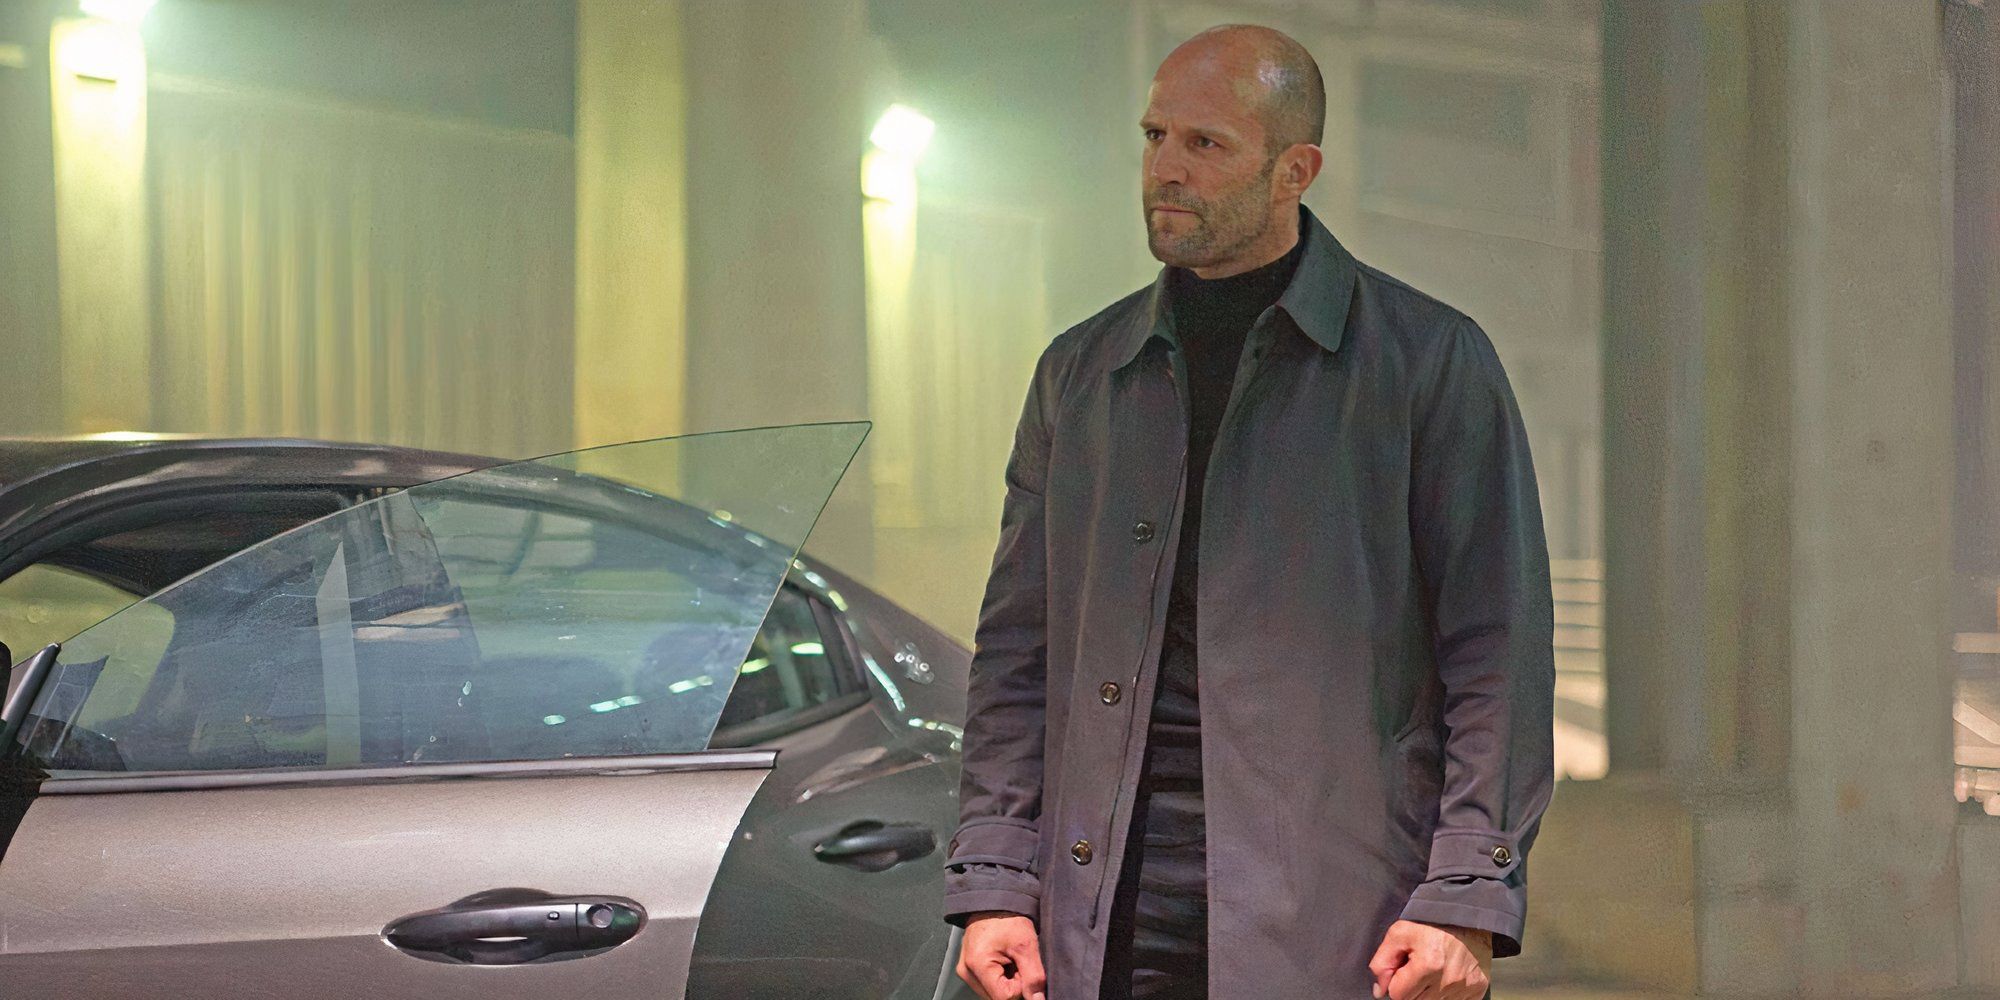 Jason Statham as Deckard Shaw in Furious 7 standing next to a car with his fists clenched.